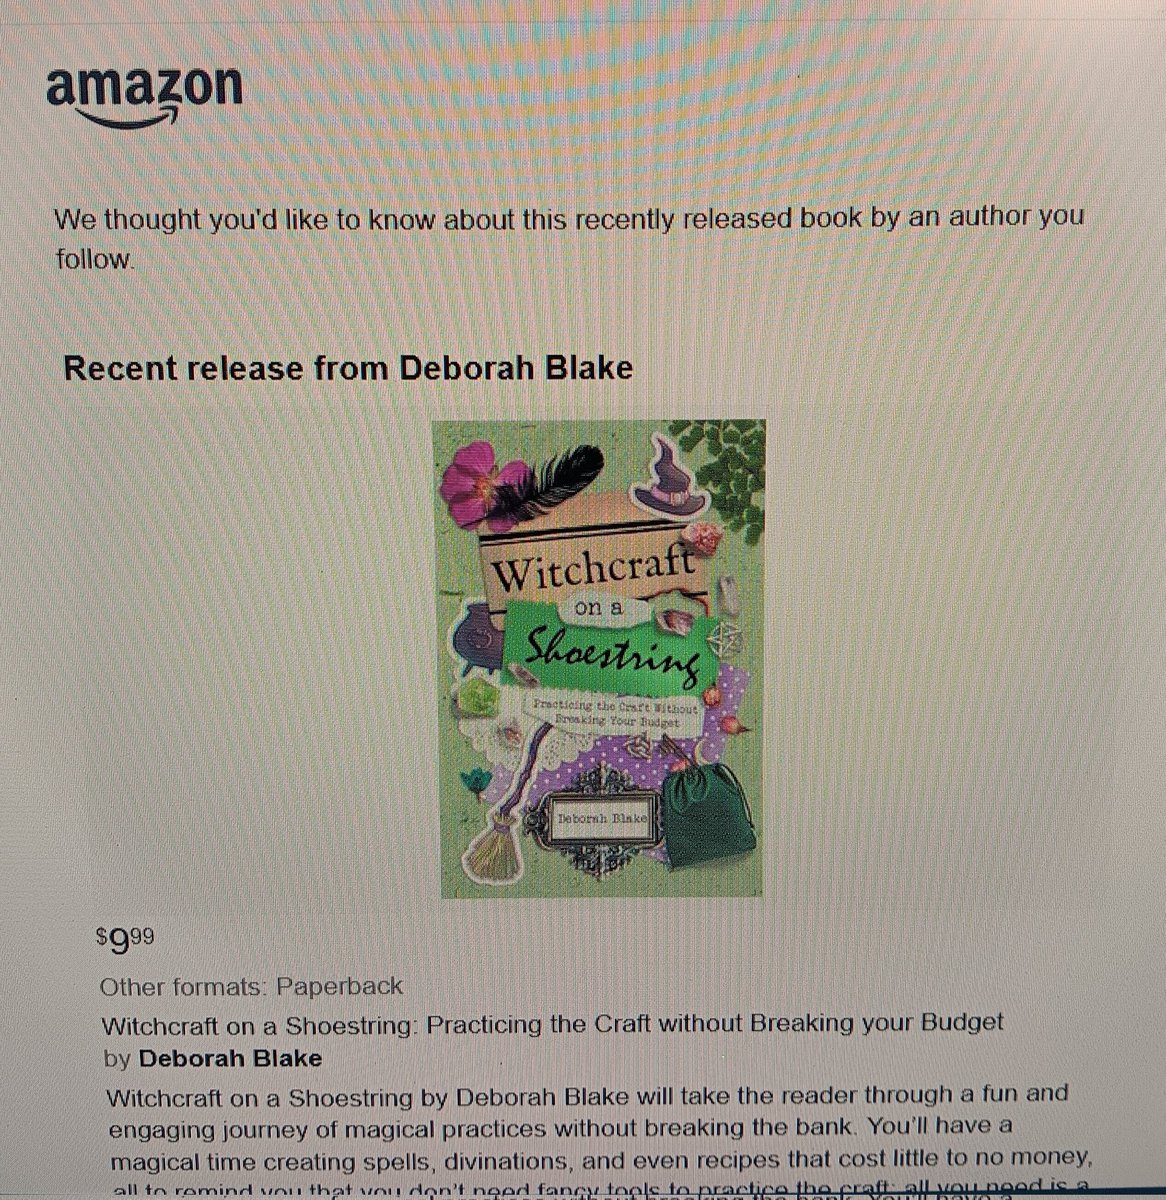 Amazon emailed me to tell me they thought I might be interested in this recently released book. What do you think?